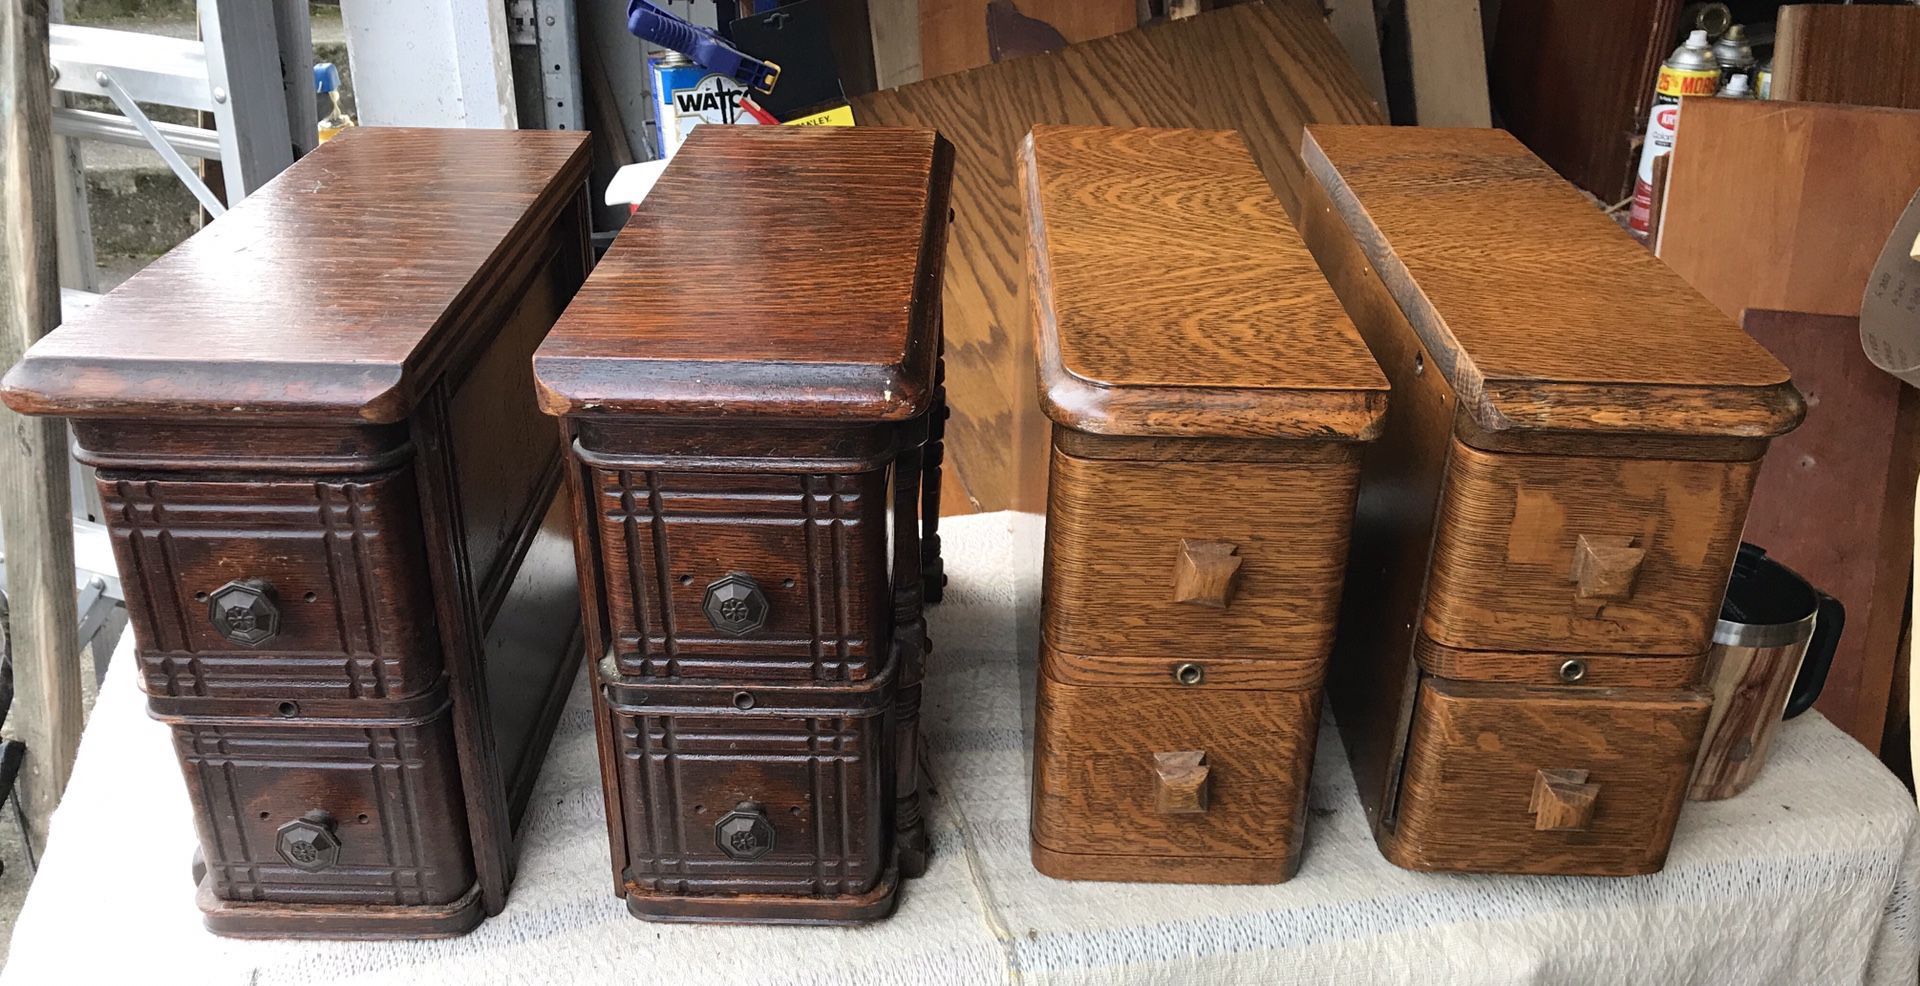 Antique Sewing accessory drawers $30 each